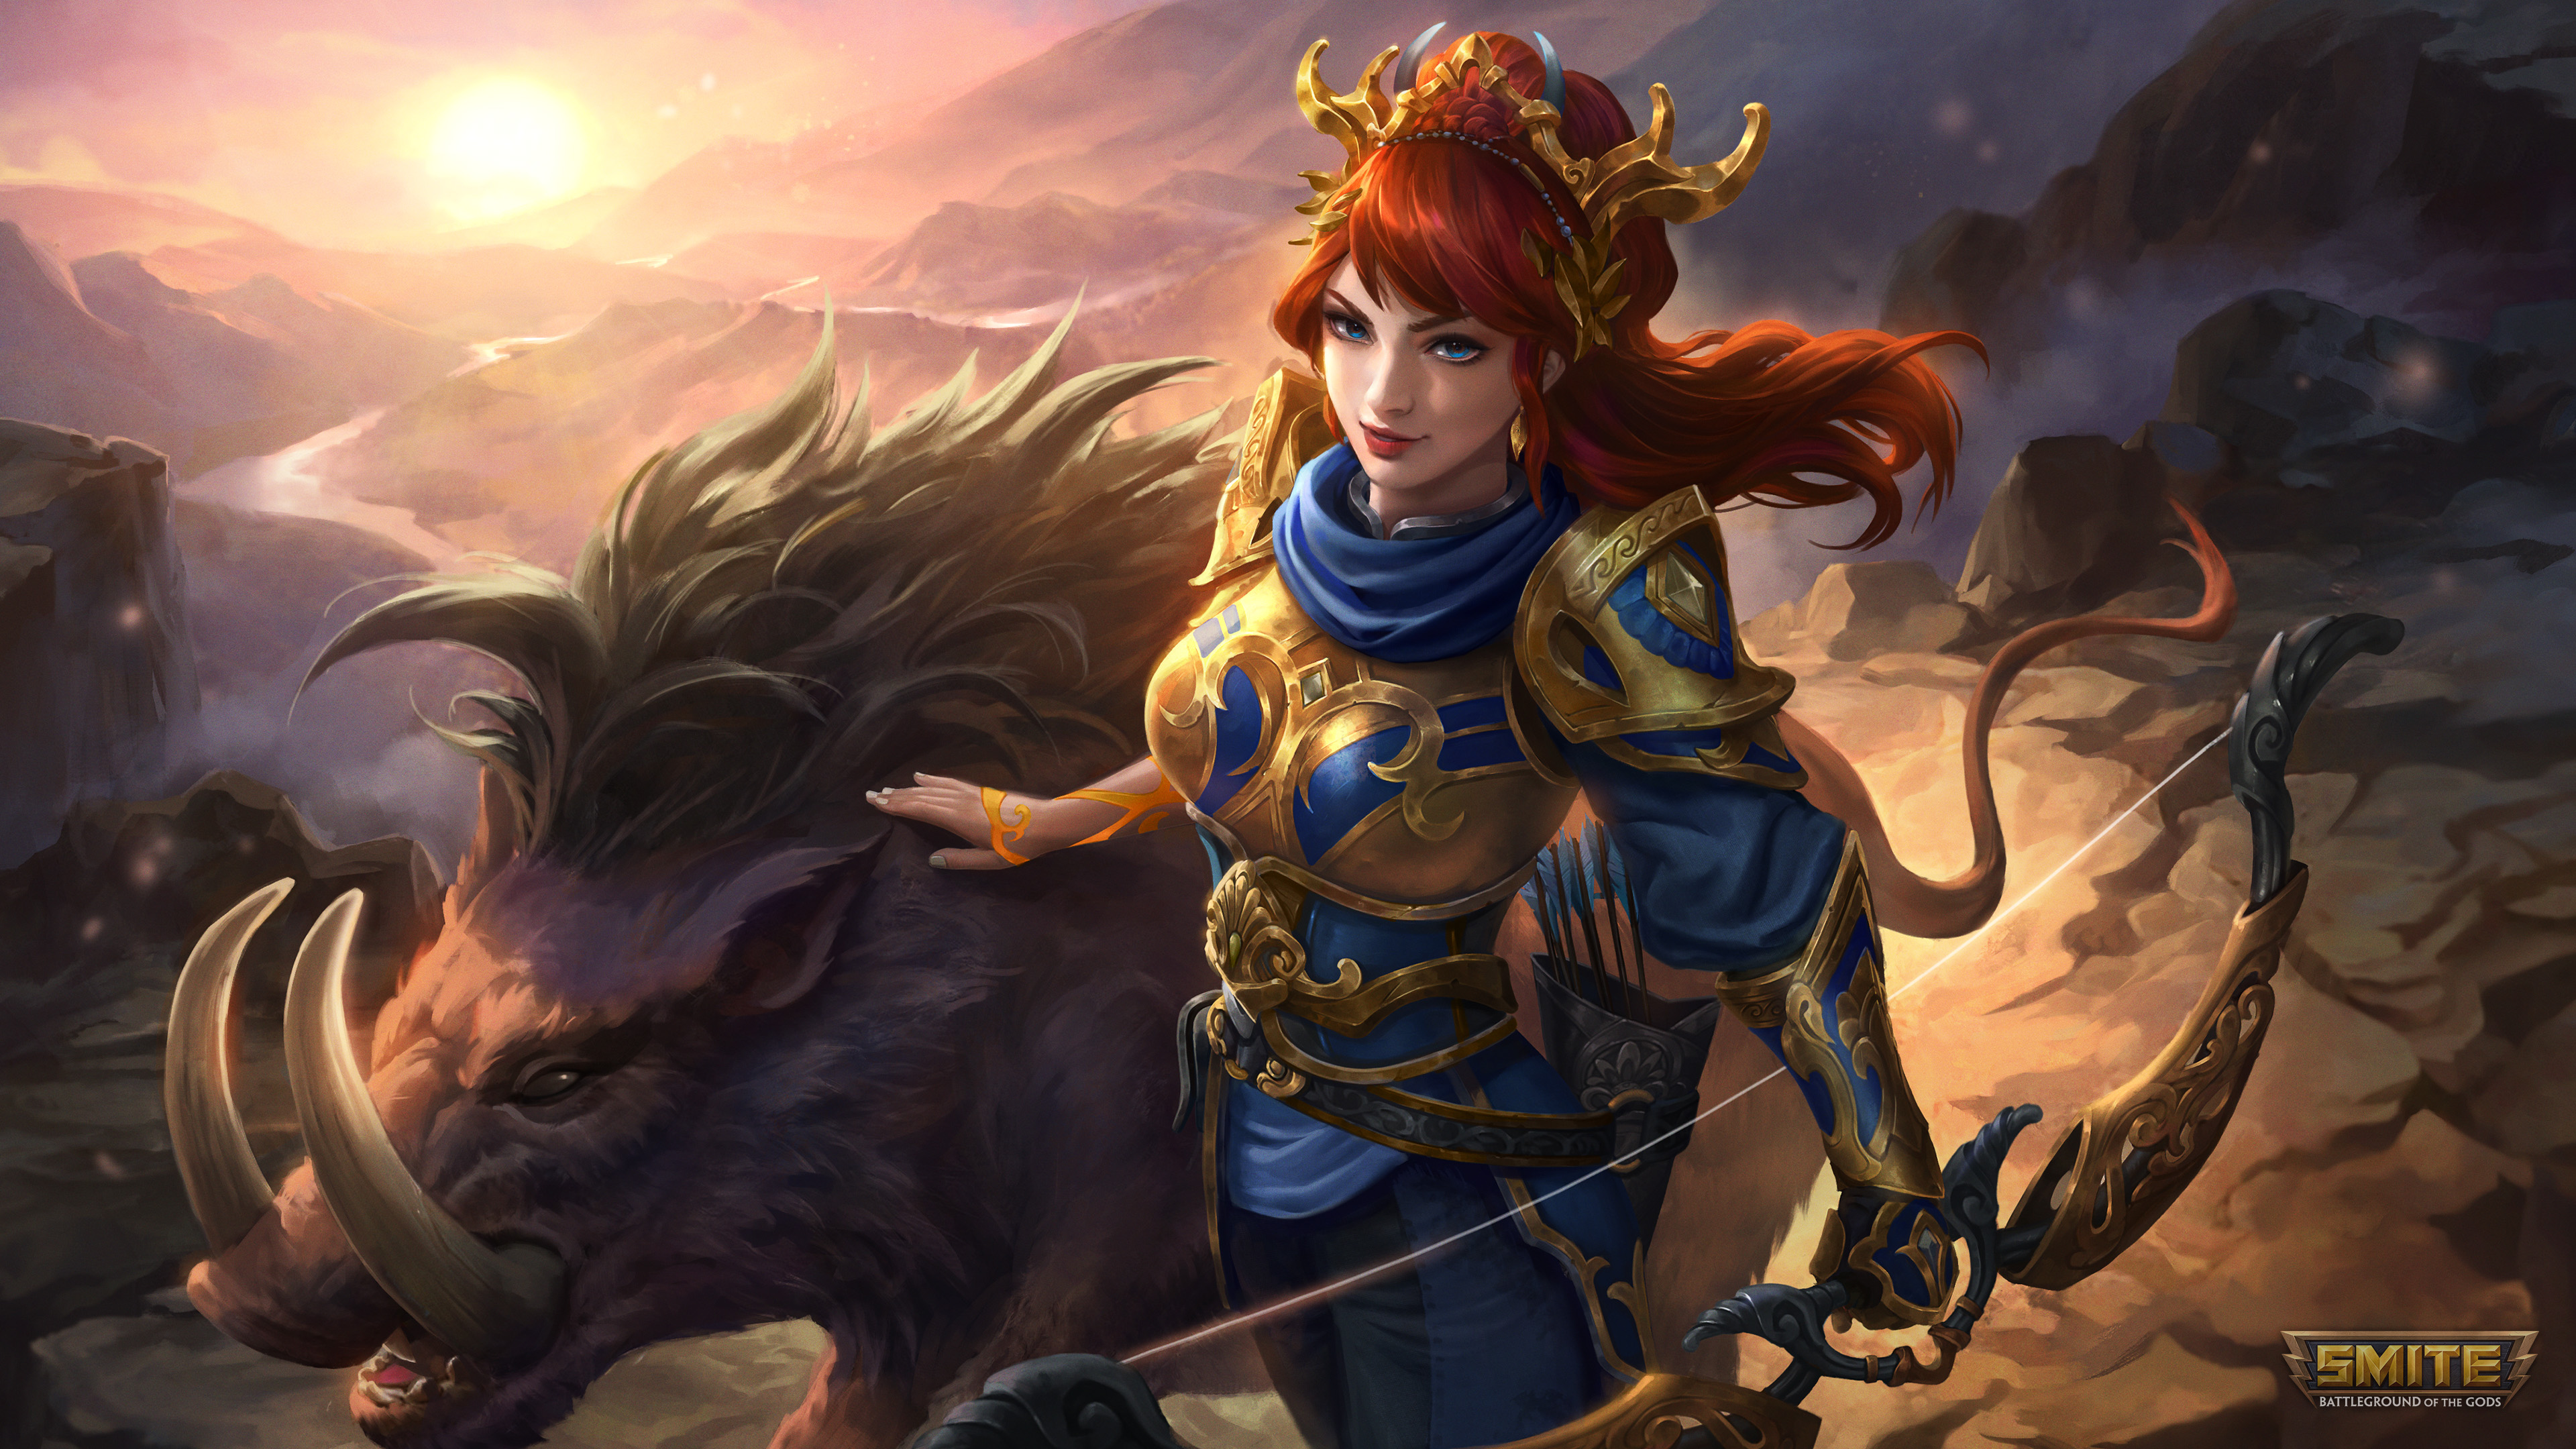 Smite Moba Video Game Characters Video Game Art Video Game Girls Video Games Smiling Redhead Looking 3840x2160